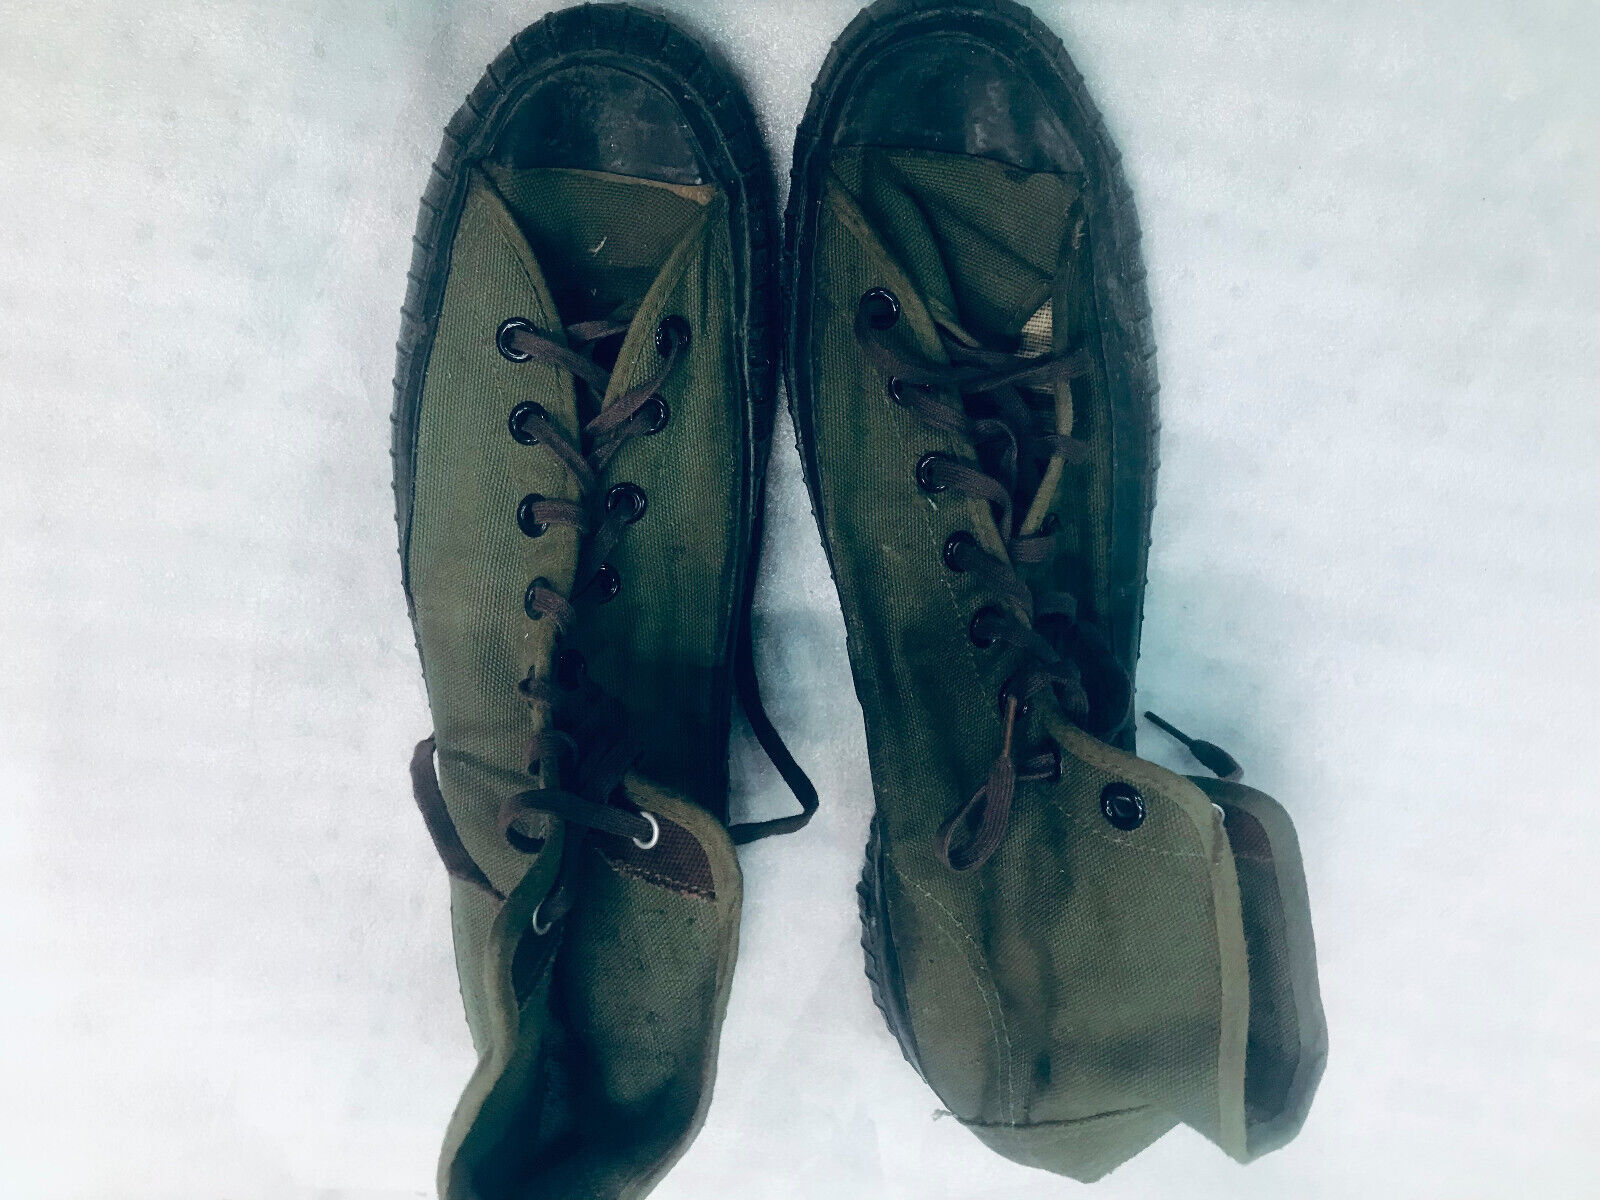 1940s WWII WW2 U.S. ARMY MILITARY ISSUE SNEAKERS TENNIS SHOES